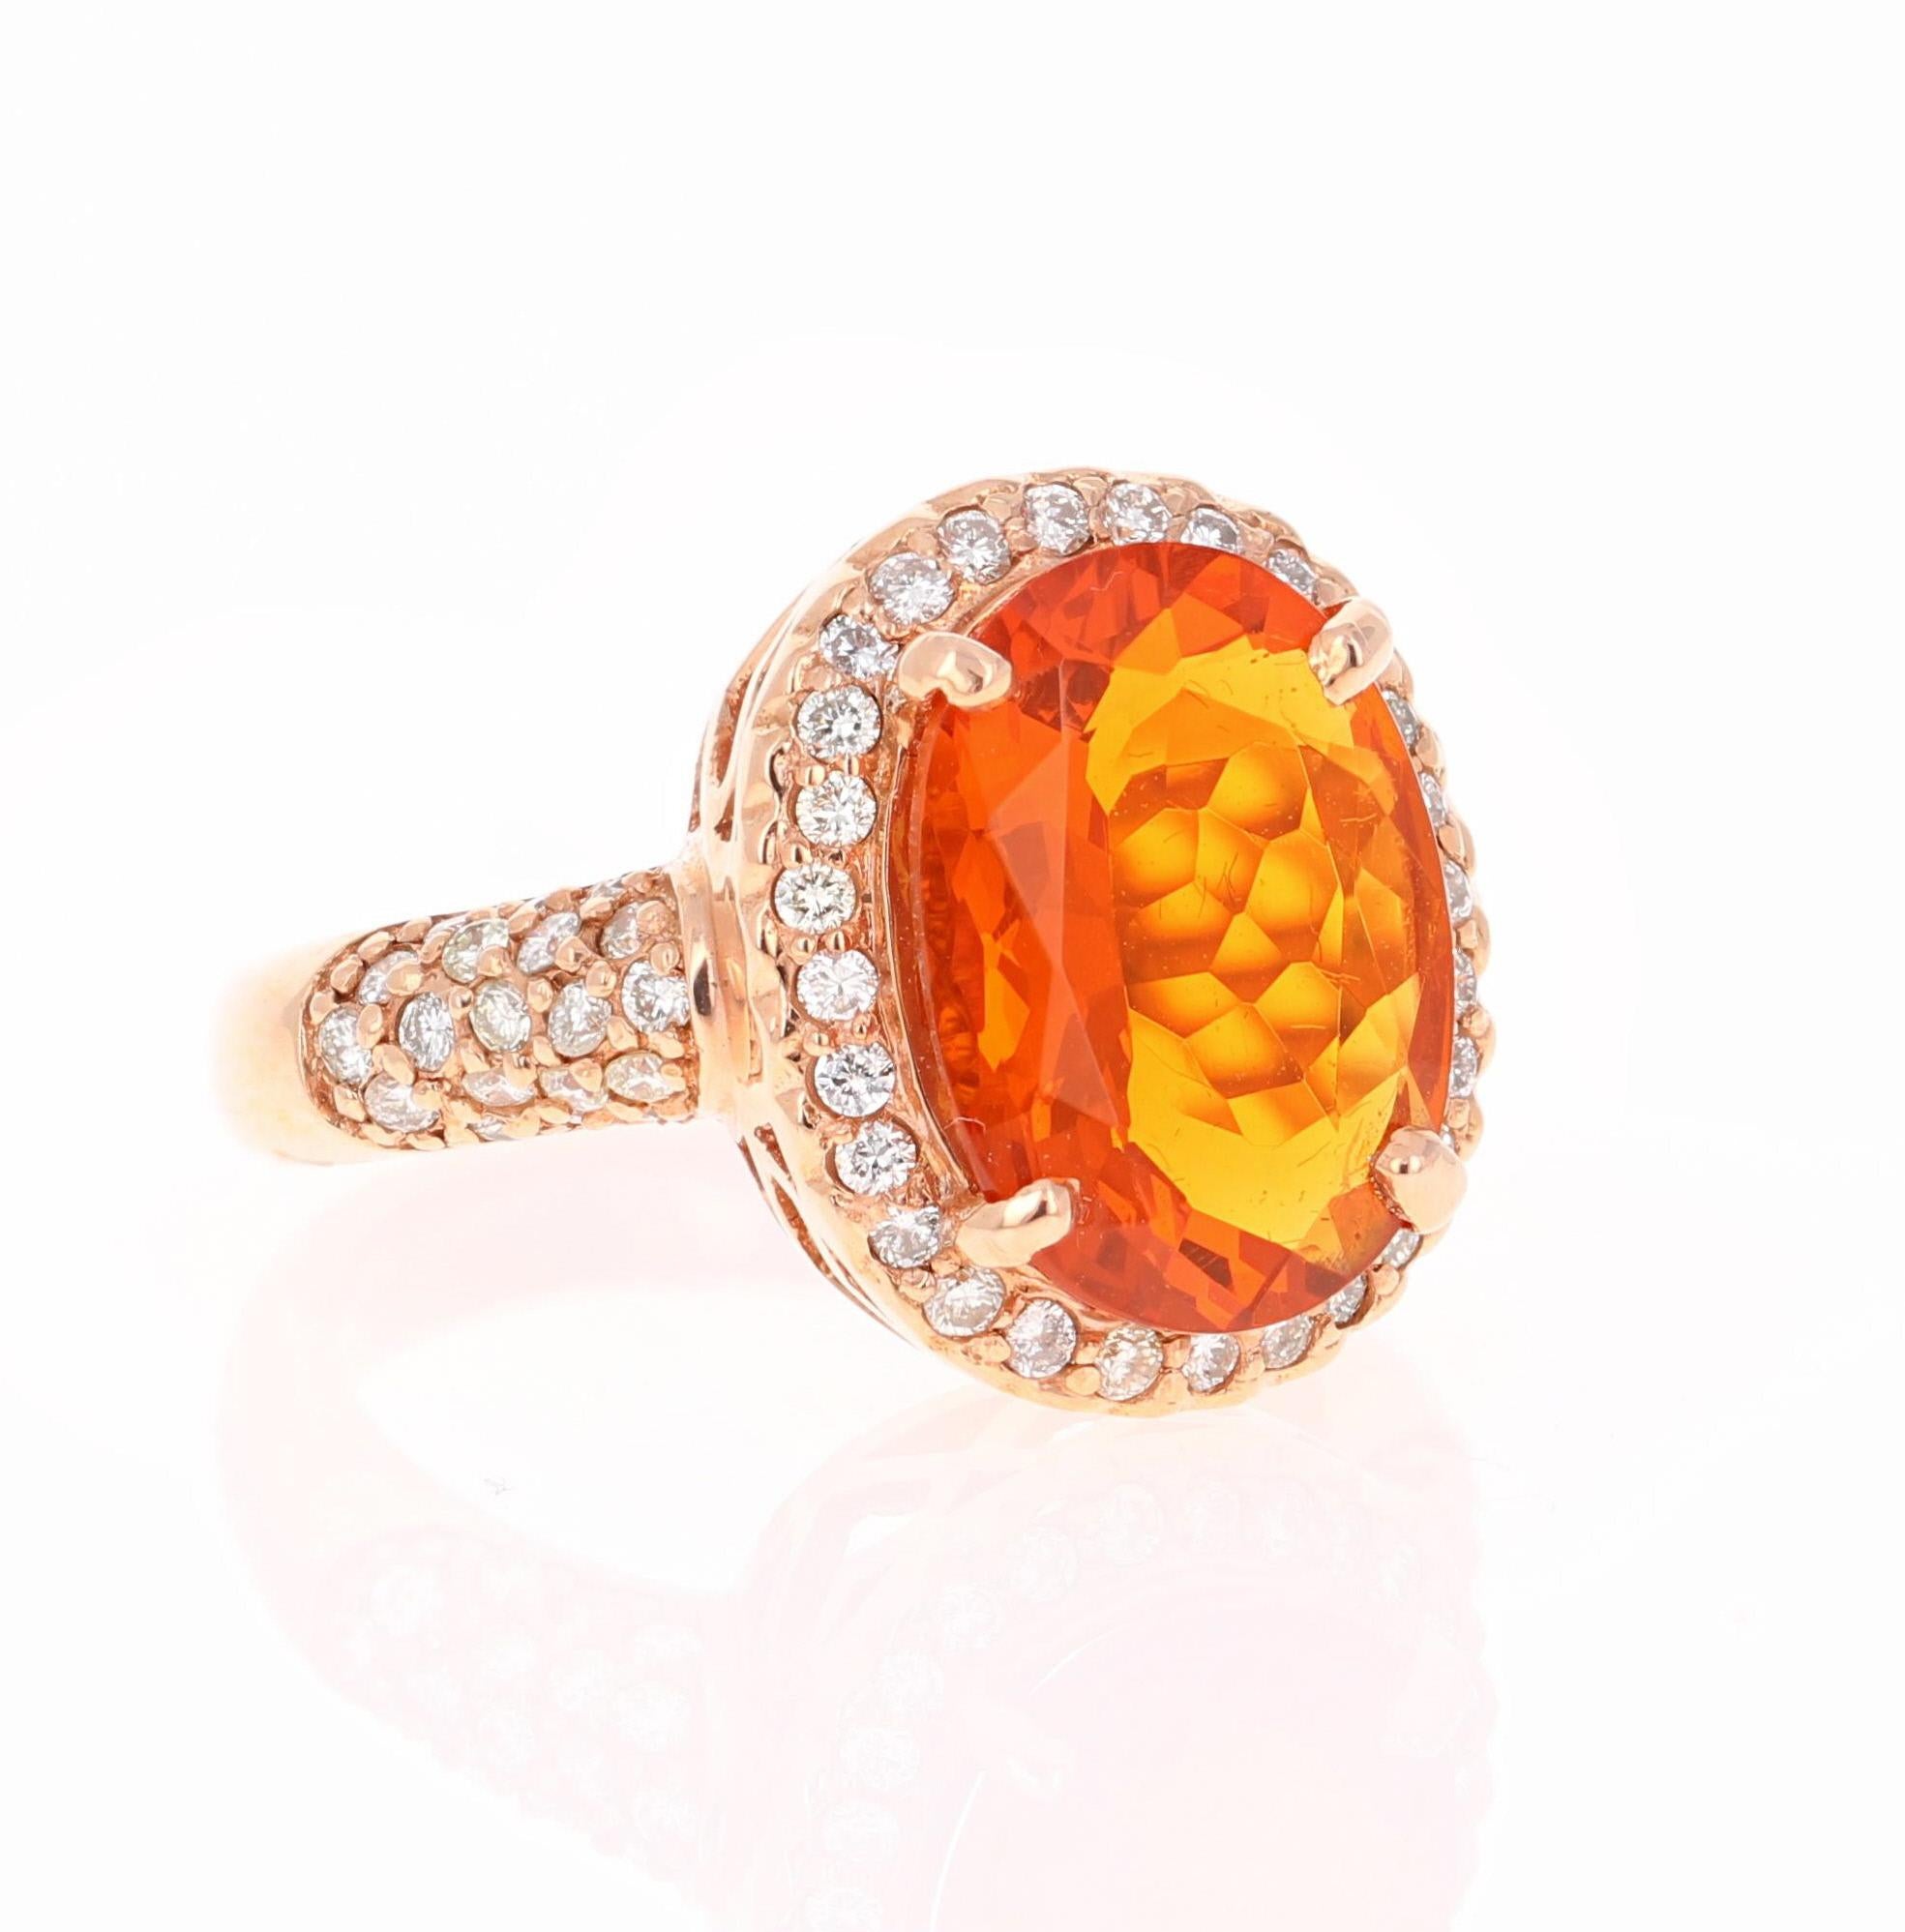 This ring has a 3.30 carat Oval Cut Fire Opal in the center of the ring and is surrounded by 66 Round Cut Diamonds that weigh a total of 0.73 carats.  The total carat weight of the ring is 4.03 carats. The Orange Mexican Fire Opals are considered